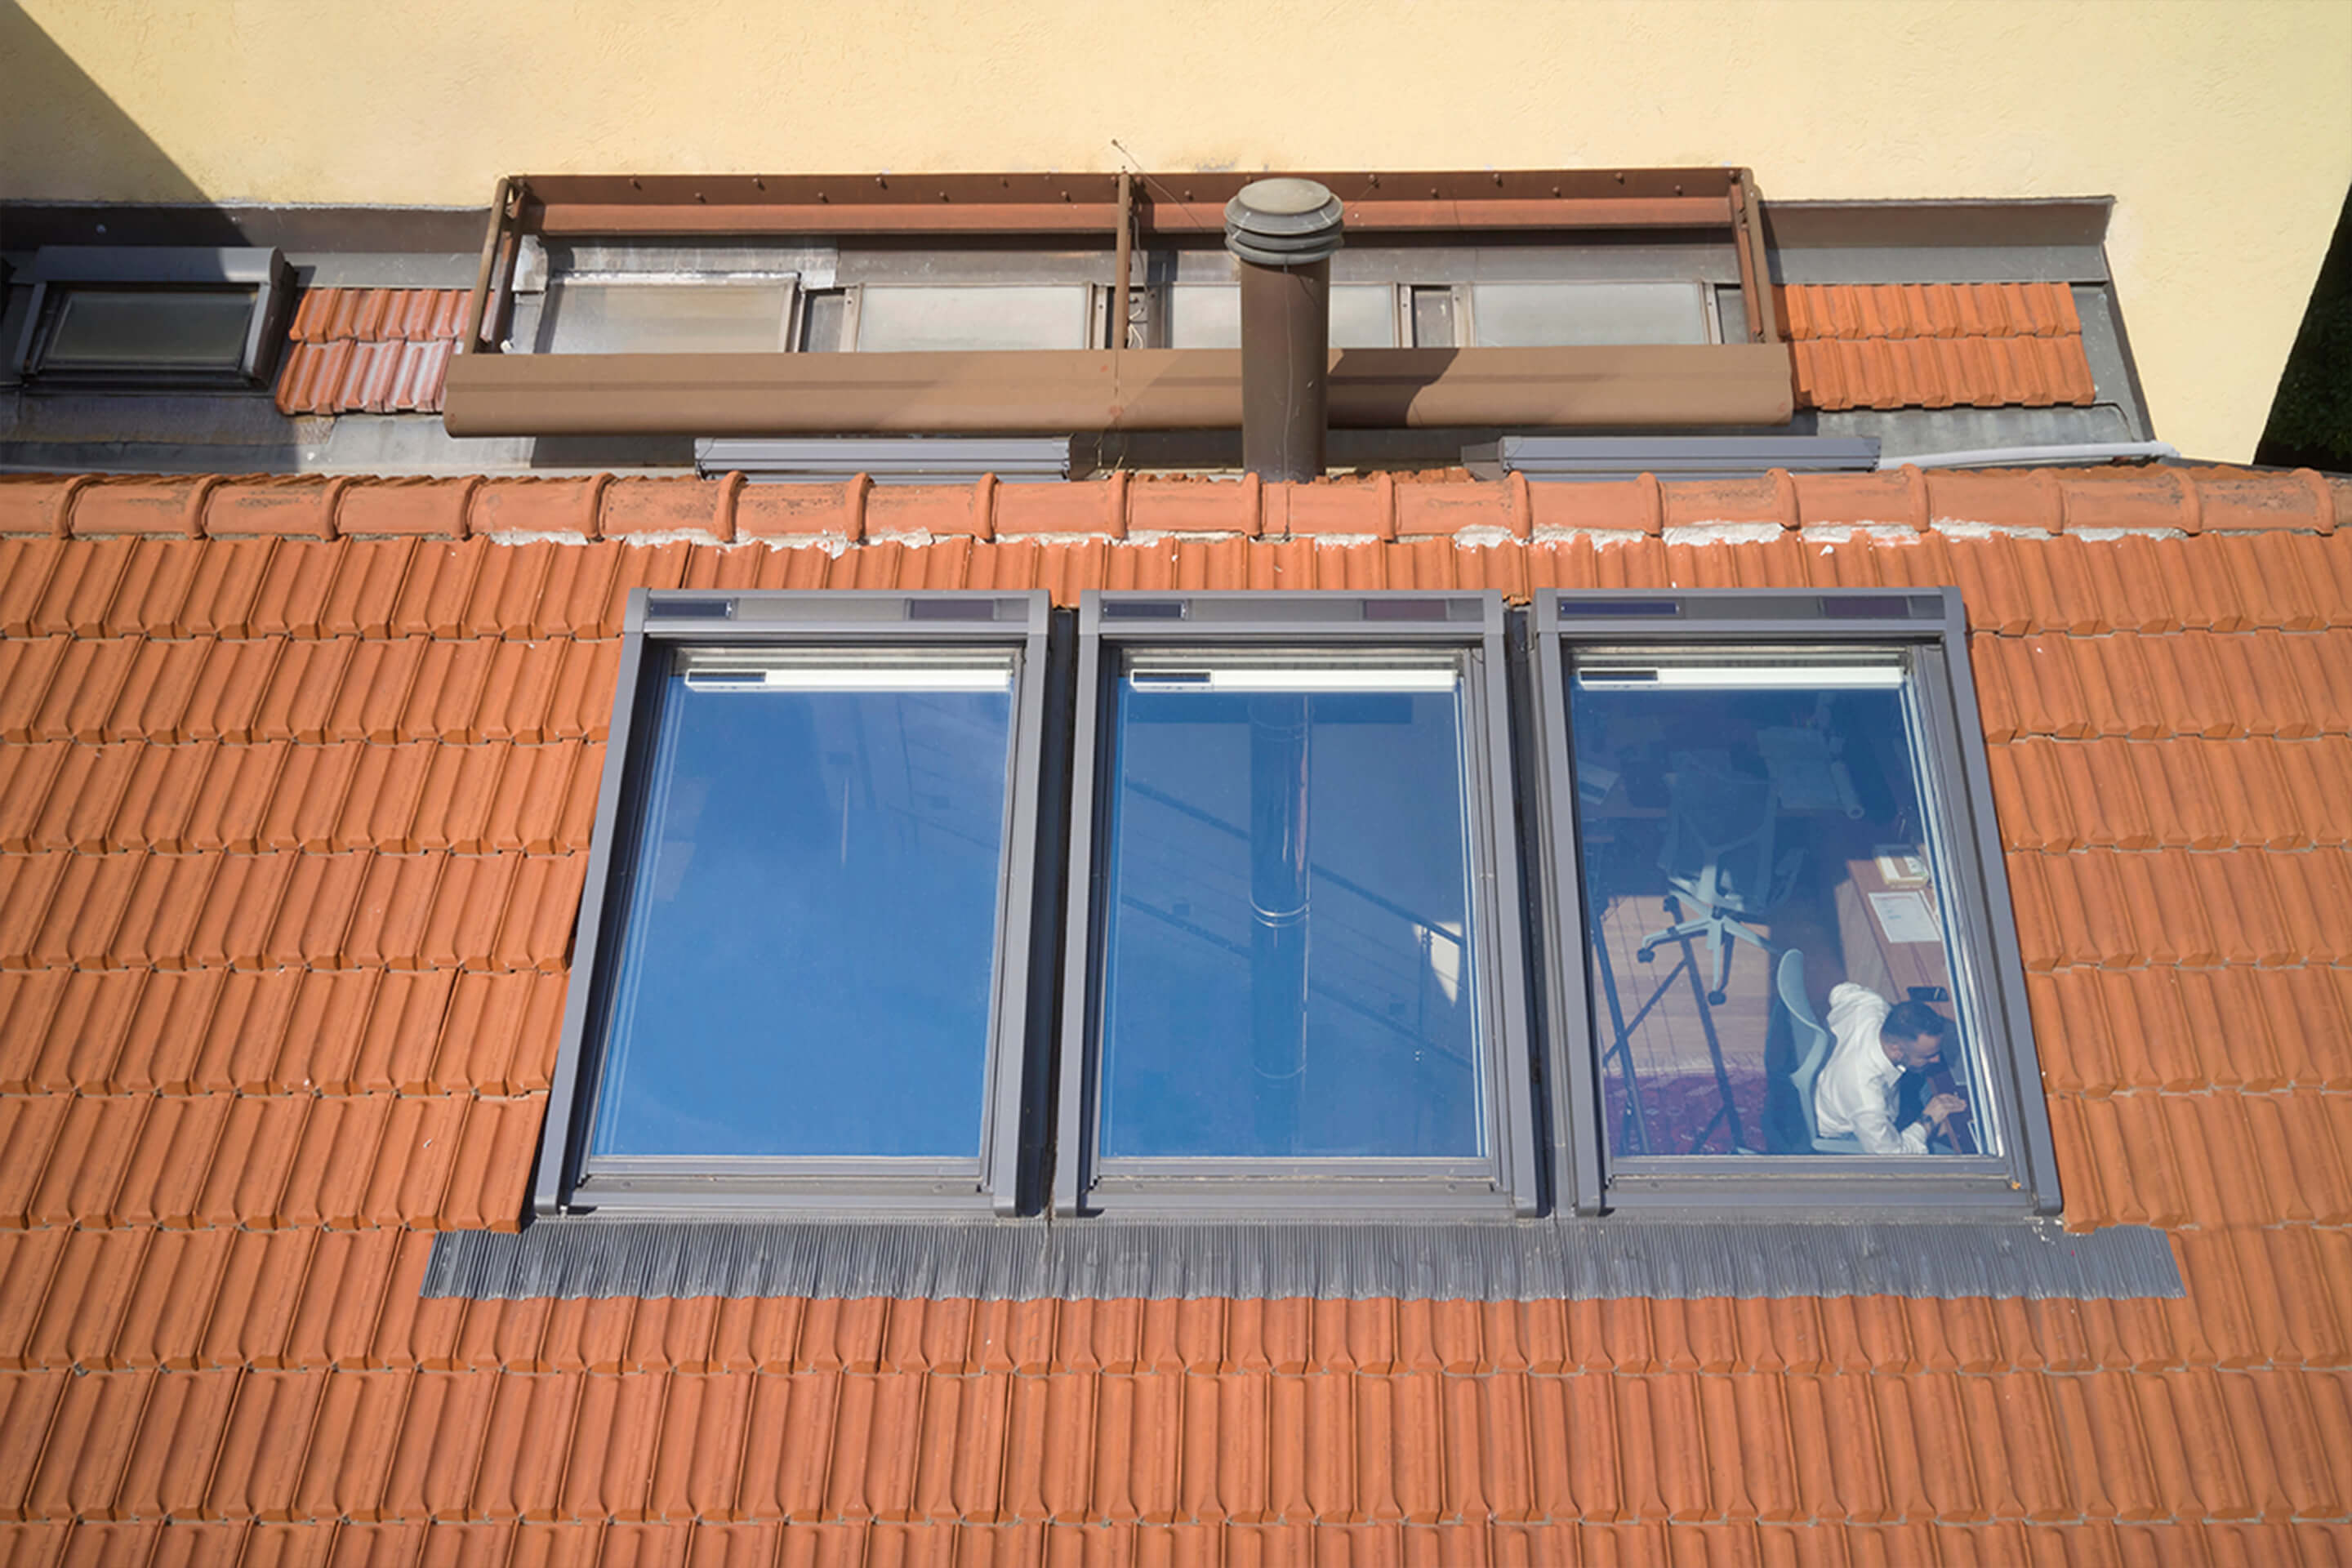 An outside view to a brown tiled roof with 3in1 roof windows